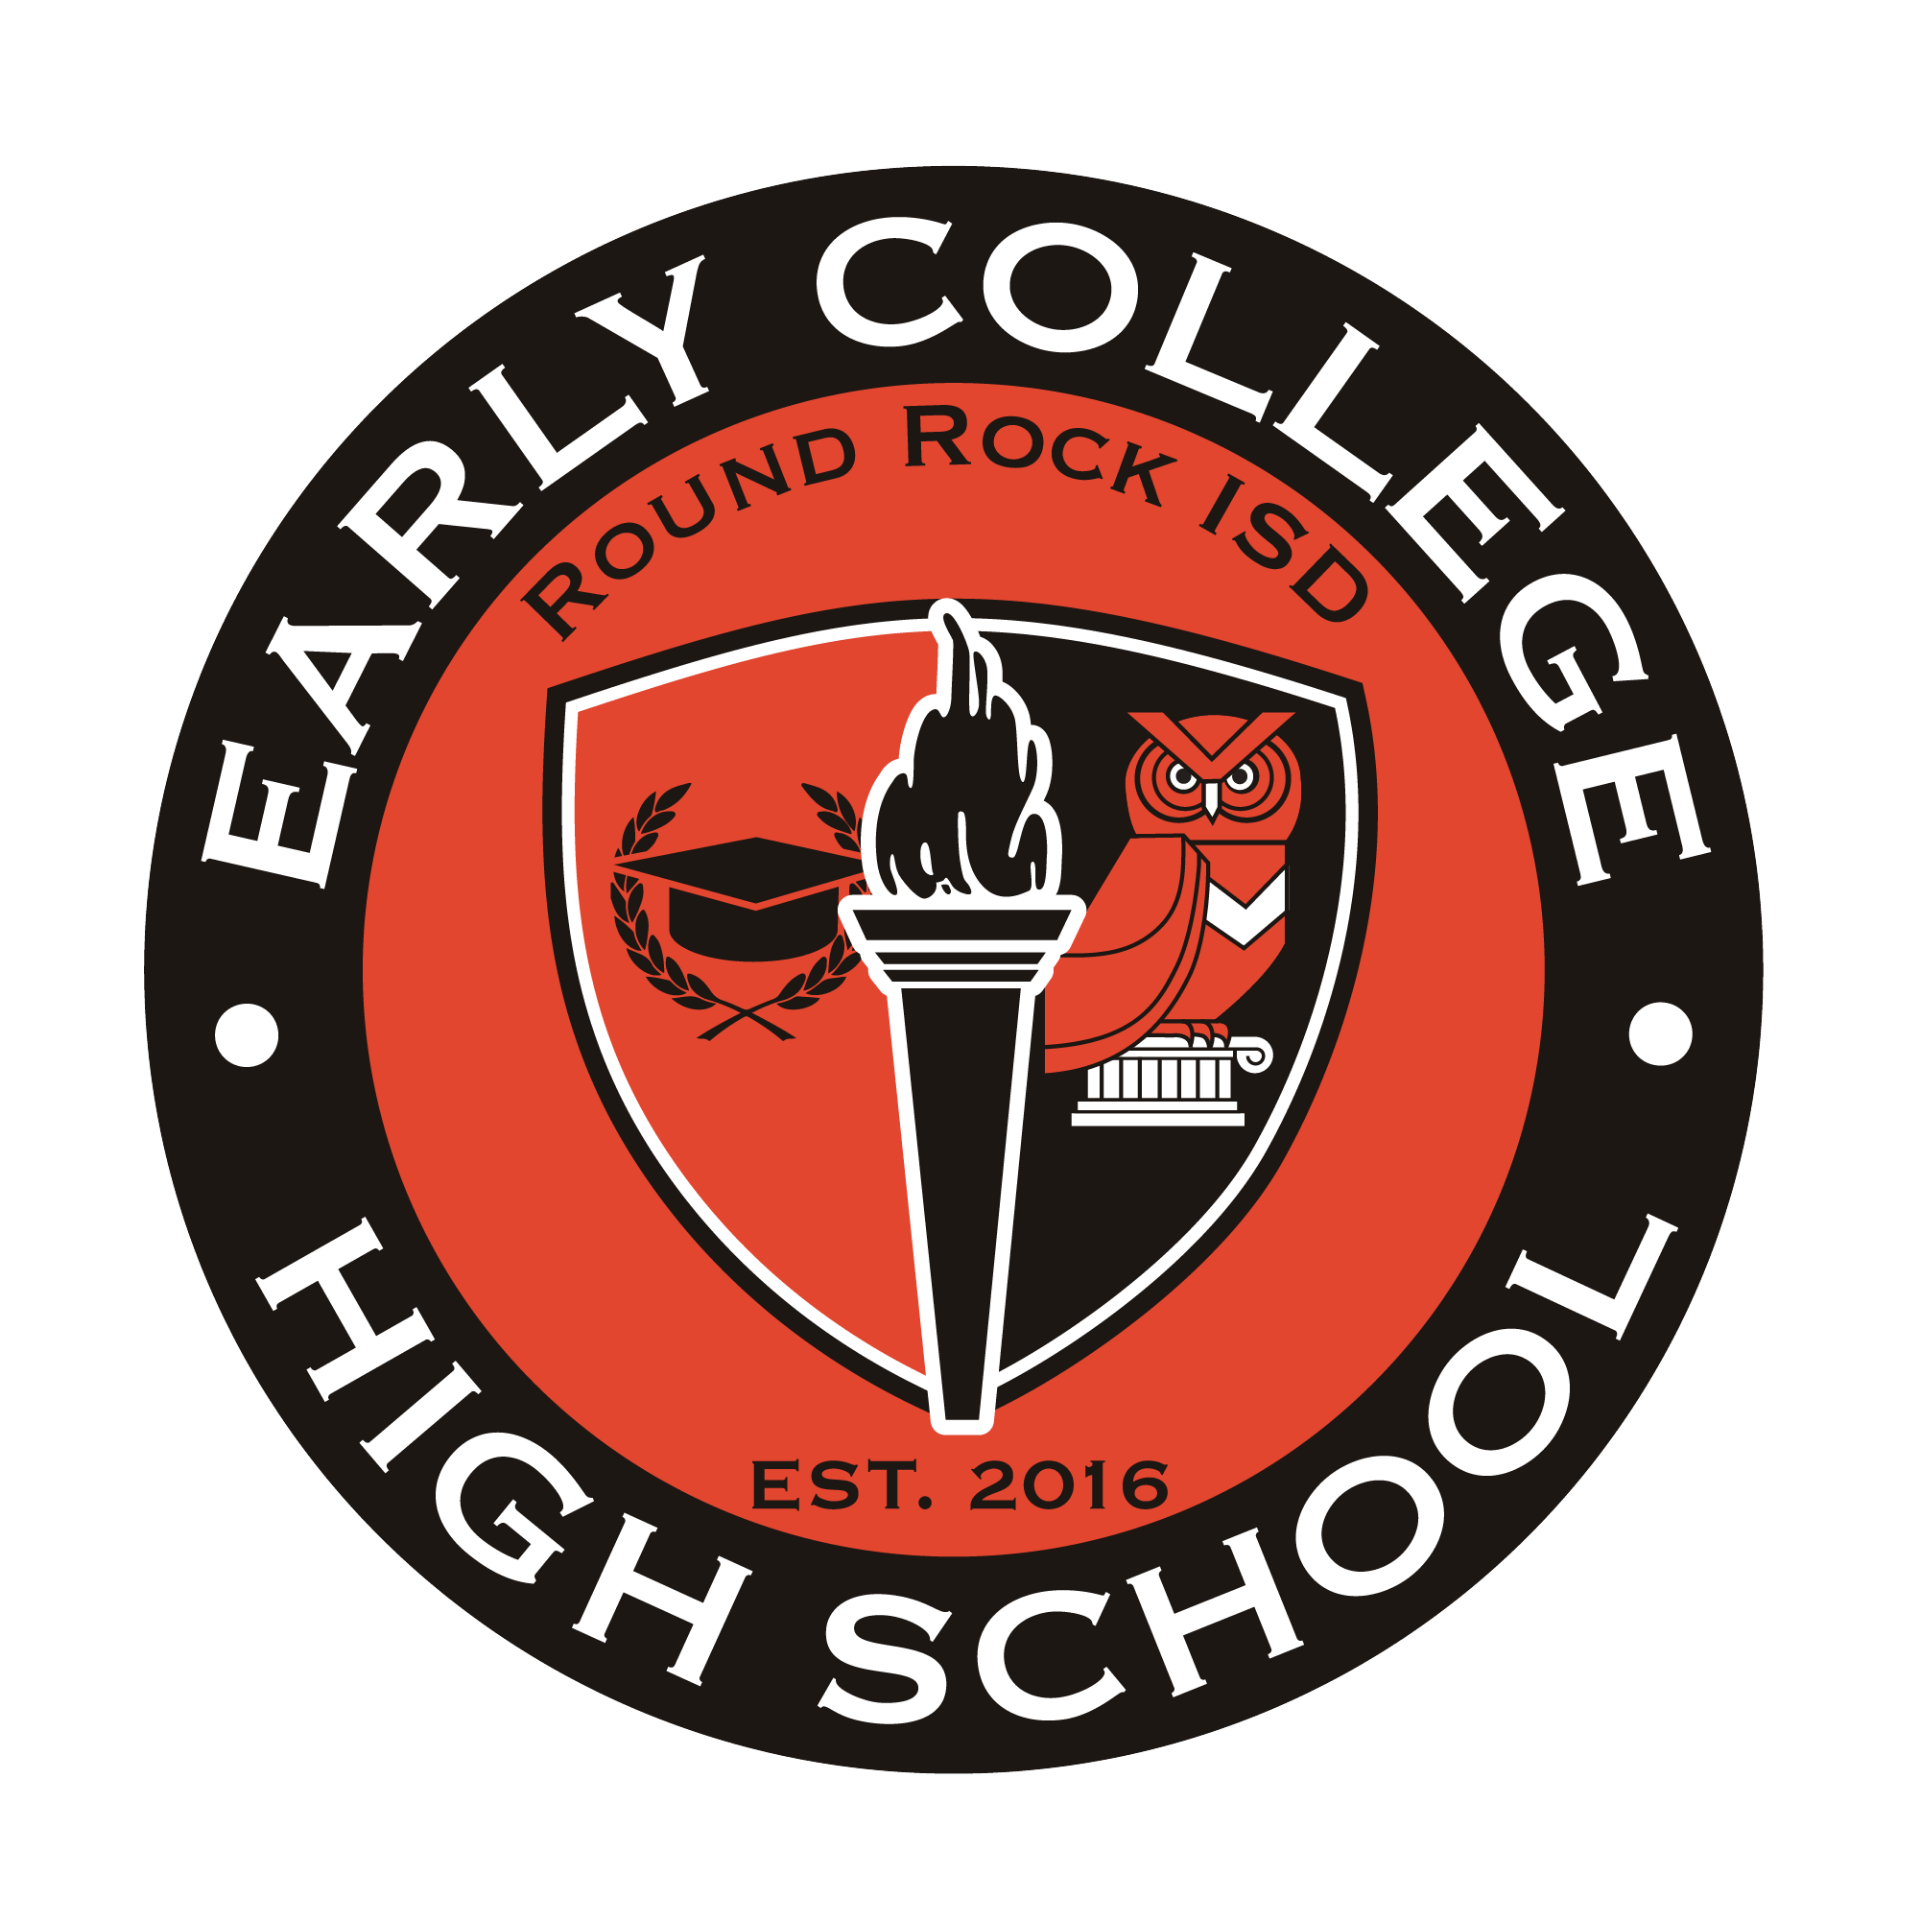 Early College High School Round Rock ISDl